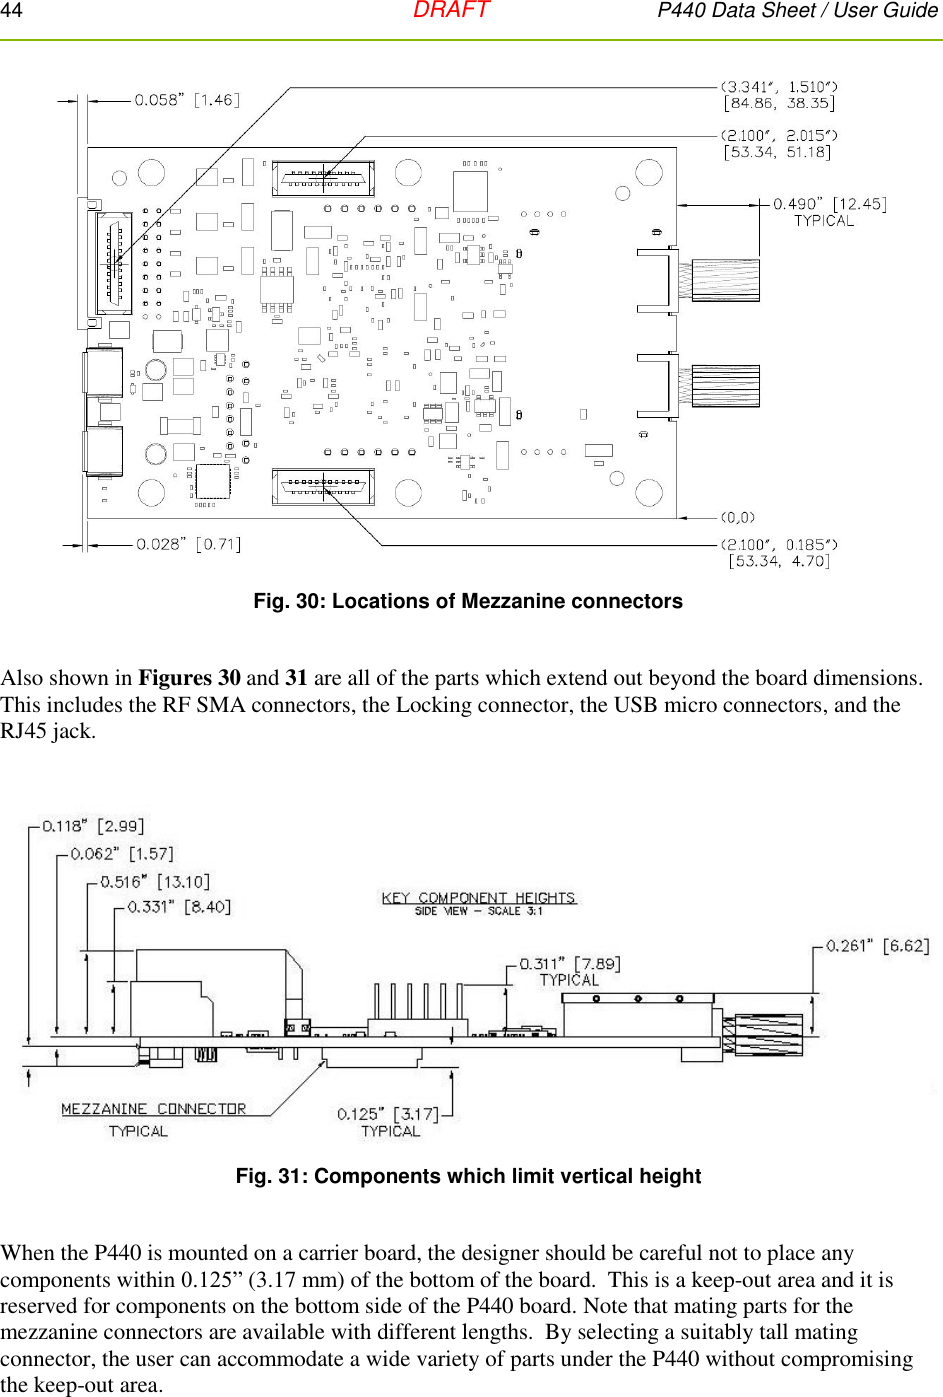 44   DRAFT P440 Data Sheet / User Guide   Fig. 30: Locations of Mezzanine connectors  Also shown in Figures 30 and 31 are all of the parts which extend out beyond the board dimensions.  This includes the RF SMA connectors, the Locking connector, the USB micro connectors, and the RJ45 jack.   Fig. 31: Components which limit vertical height  When the P440 is mounted on a carrier board, the designer should be careful not to place any components within 0.125” (3.17 mm) of the bottom of the board.  This is a keep-out area and it is reserved for components on the bottom side of the P440 board. Note that mating parts for the mezzanine connectors are available with different lengths.  By selecting a suitably tall mating connector, the user can accommodate a wide variety of parts under the P440 without compromising the keep-out area. 